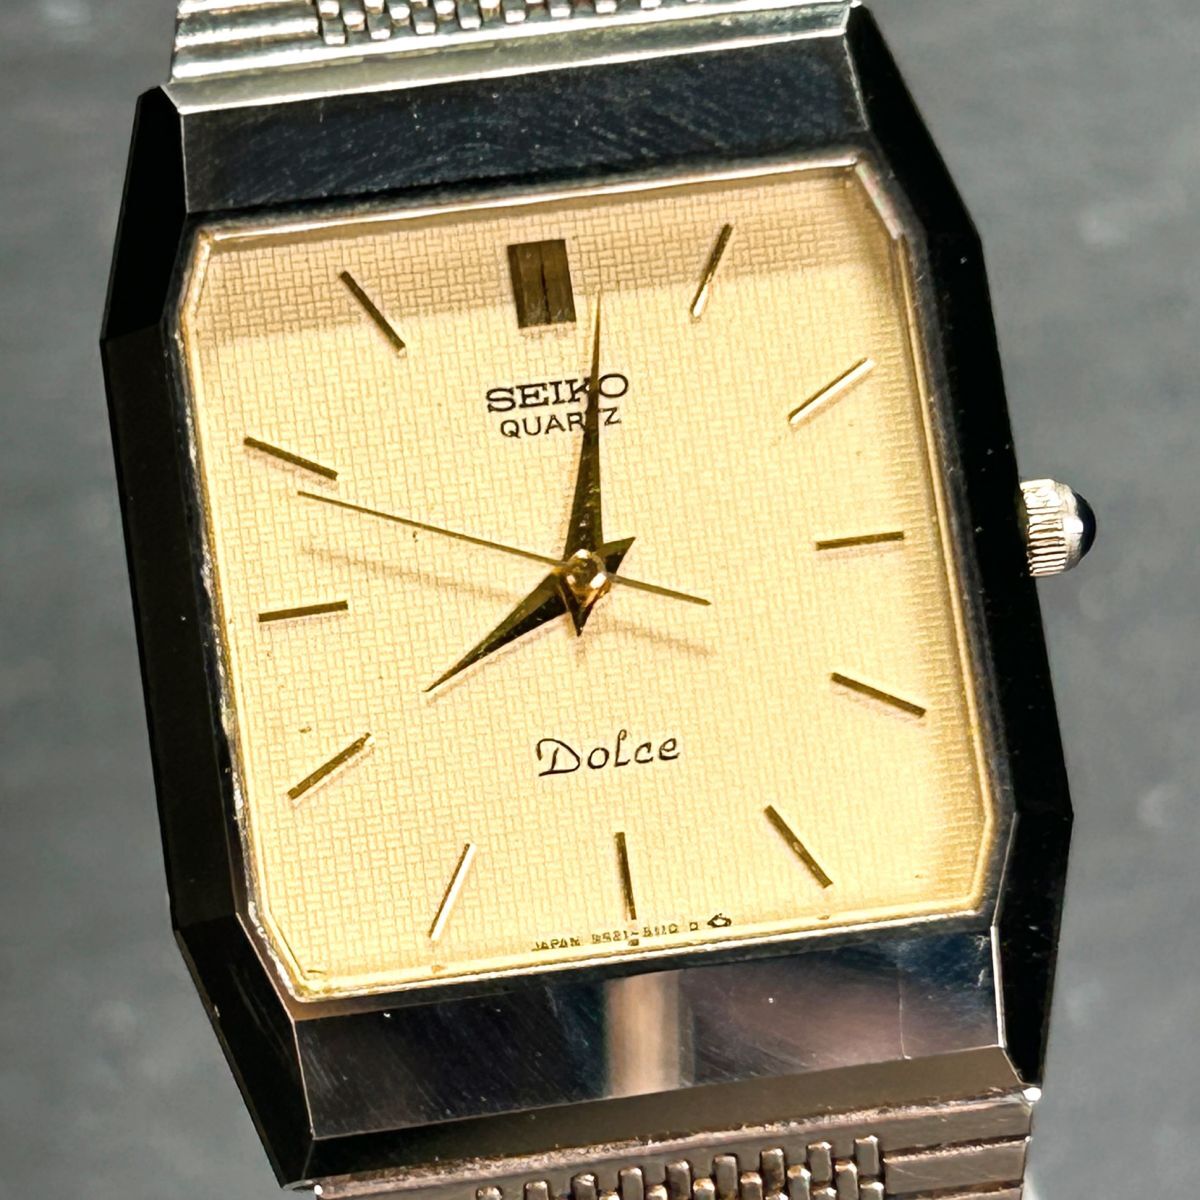 SEIKO Seiko DOLCE Dolce 9521-5110 wristwatch quarts analogue 3 hands stainless steel Gold new goods battery replaced operation verification ending 